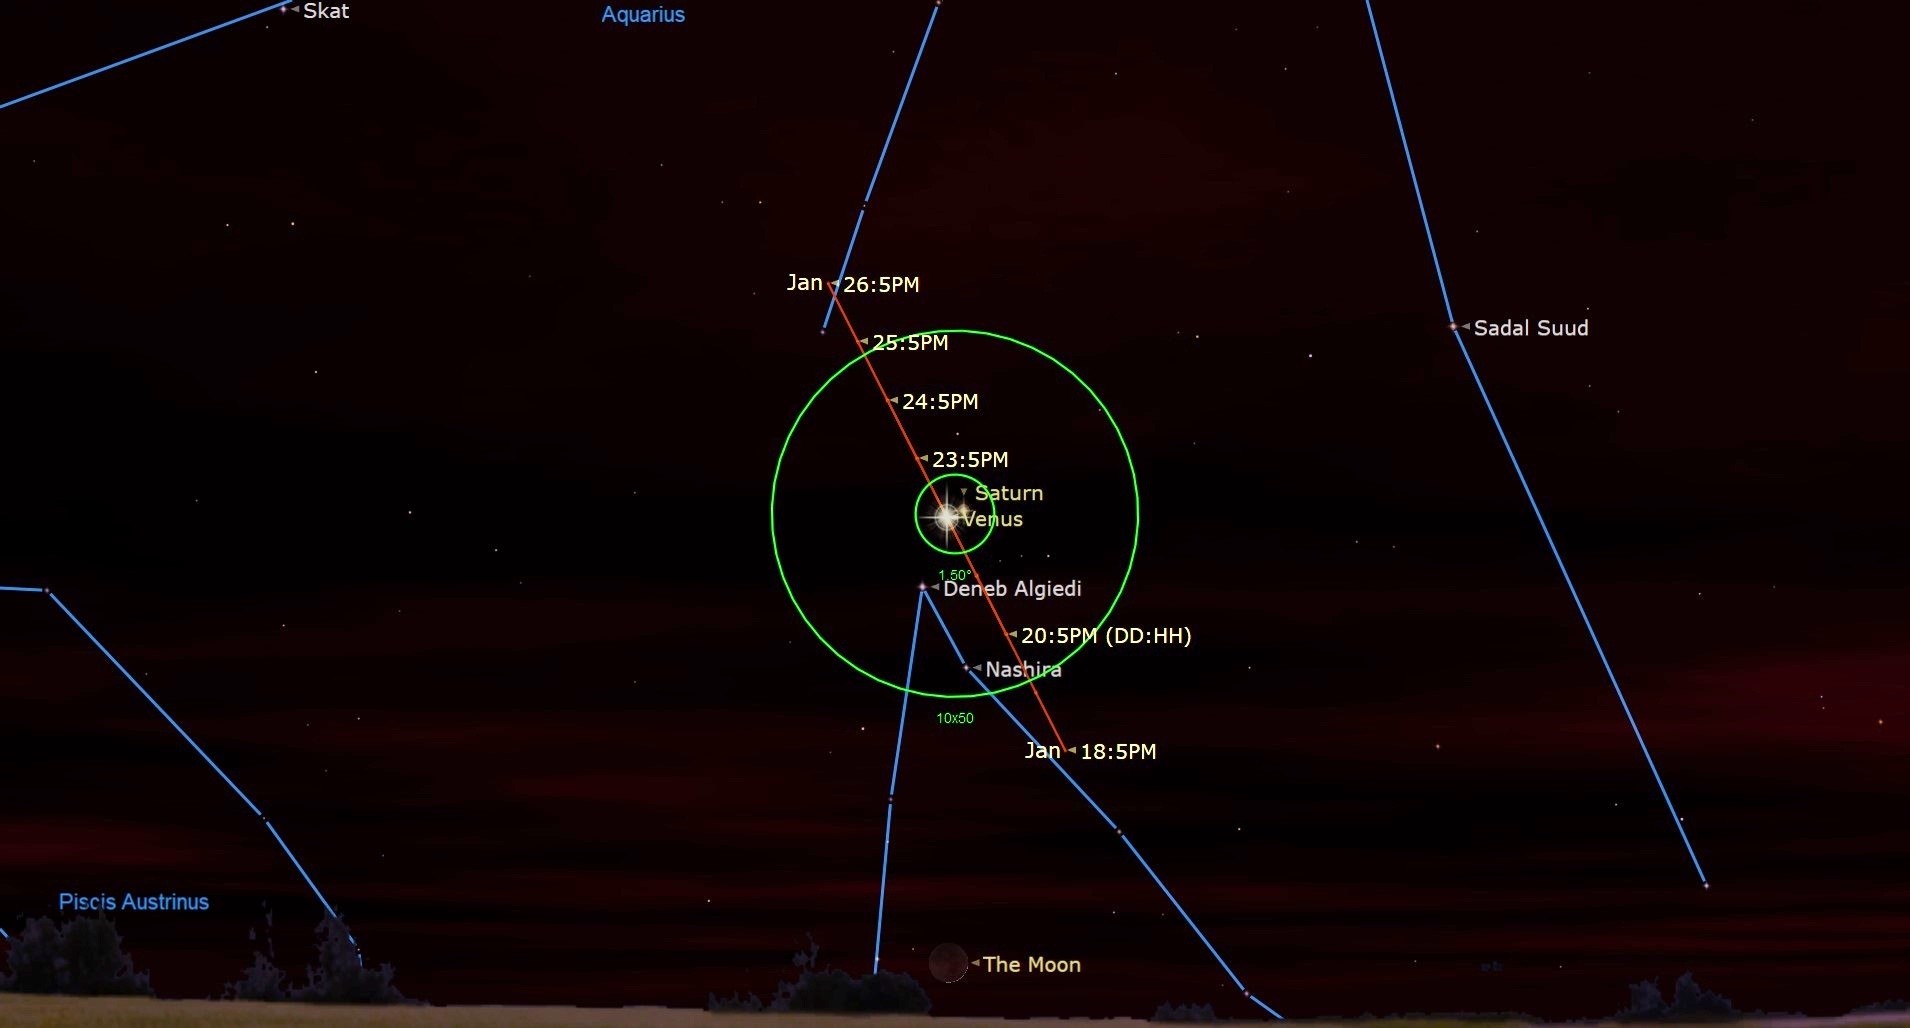 Illustration of the night sky on January 22 showing the conjunction of Venus and Saturn.